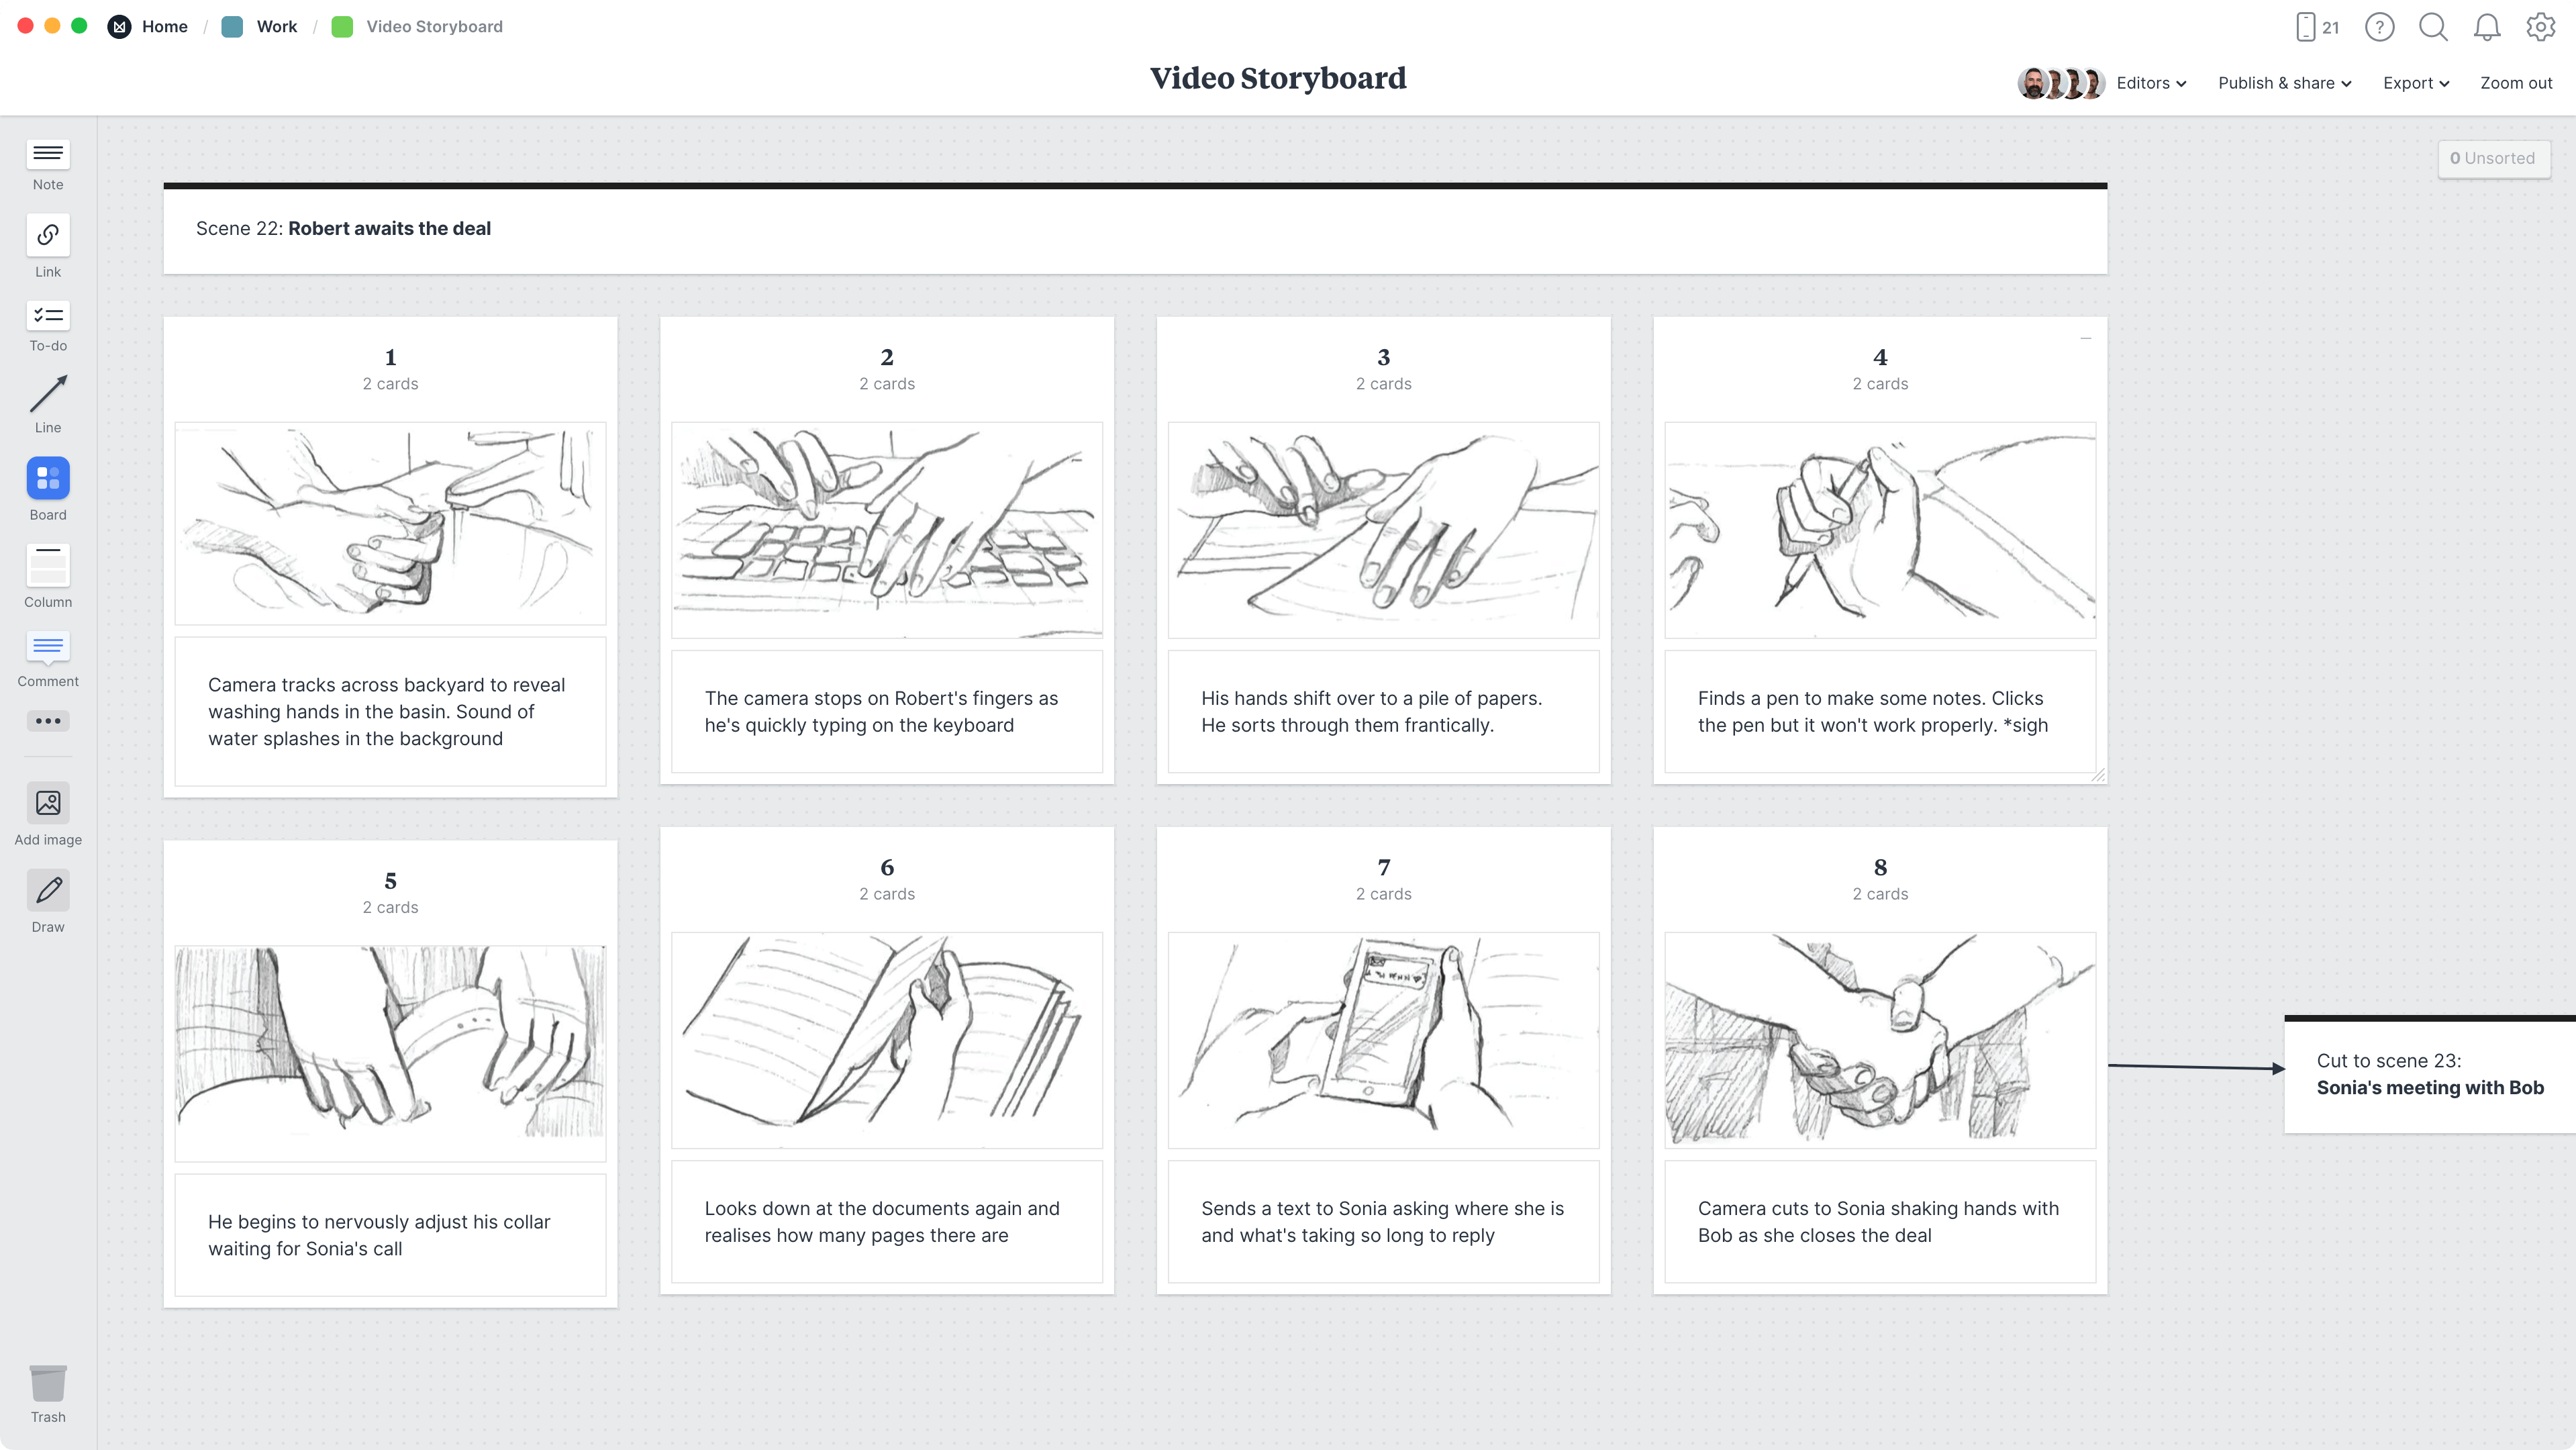 Video Storyboard Template, within the Milanote app